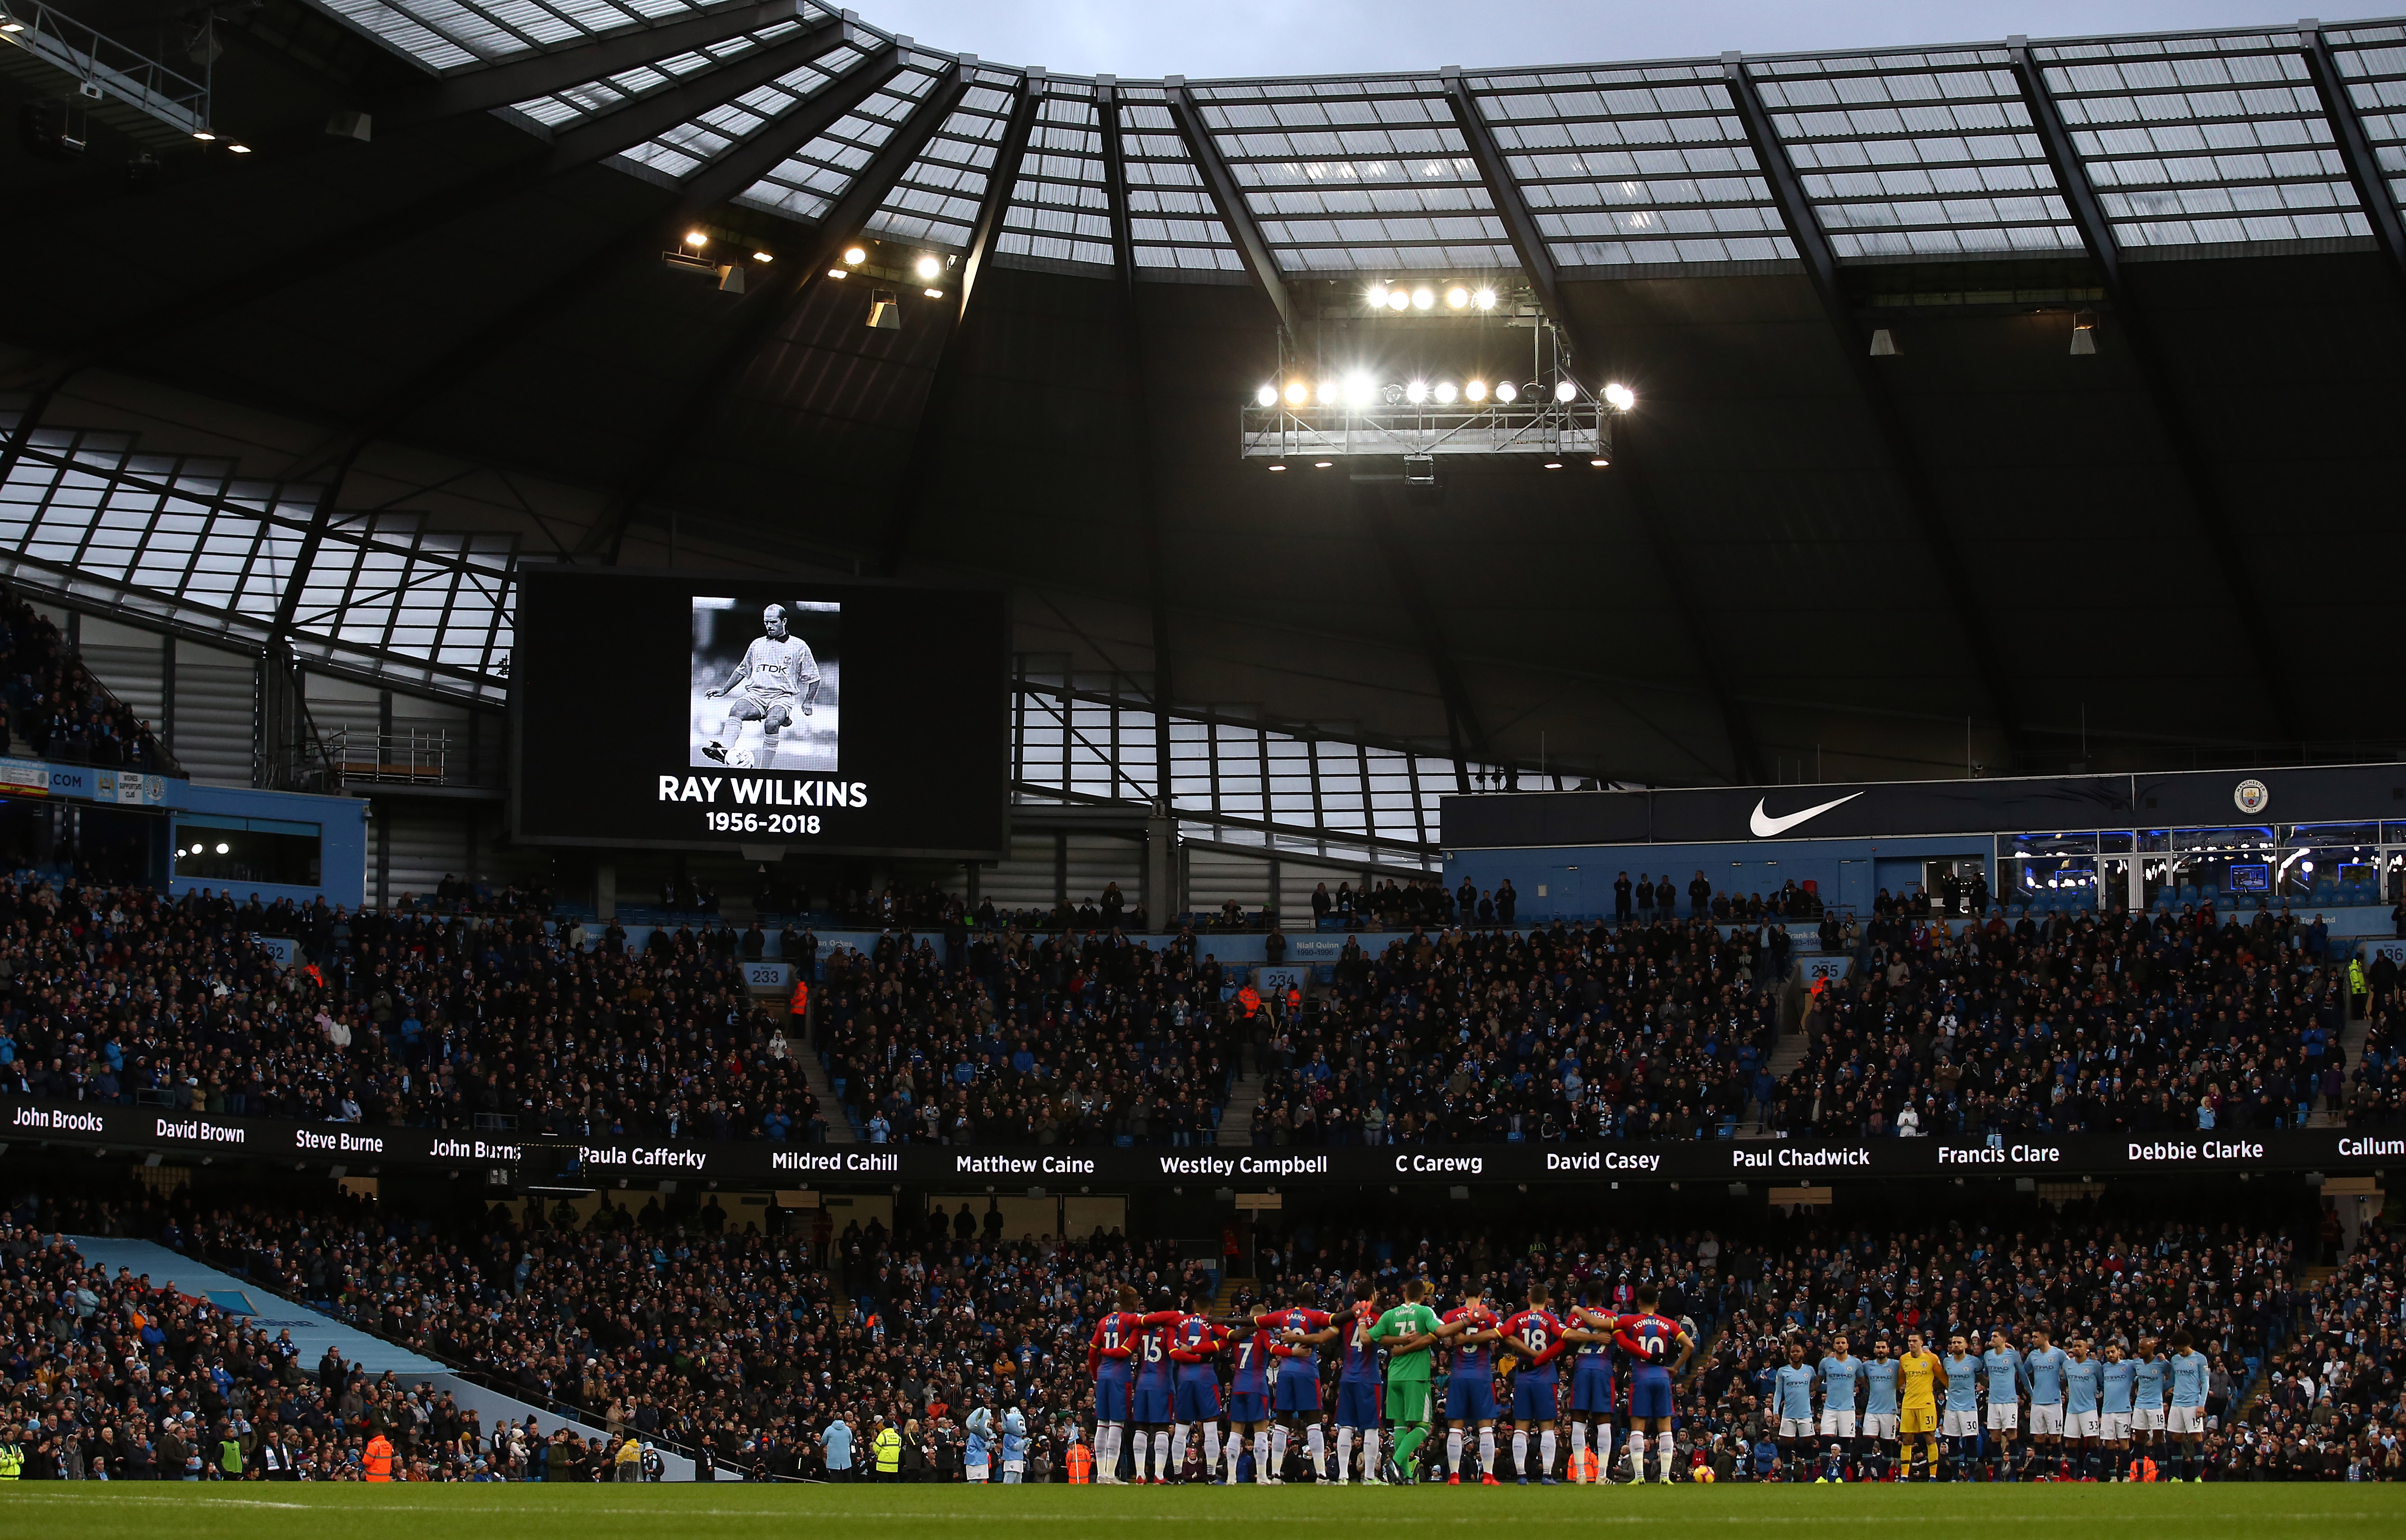 MANCHESTER, ENGLAND - DECEMBER 22: Players observe a minute silence during the Premier League match between Manchester City and Crystal Palace at Etihad Stadium on December 22, 2018 in Manchester, United Kingdom. (Photo by Jan Kruger/Getty Images)